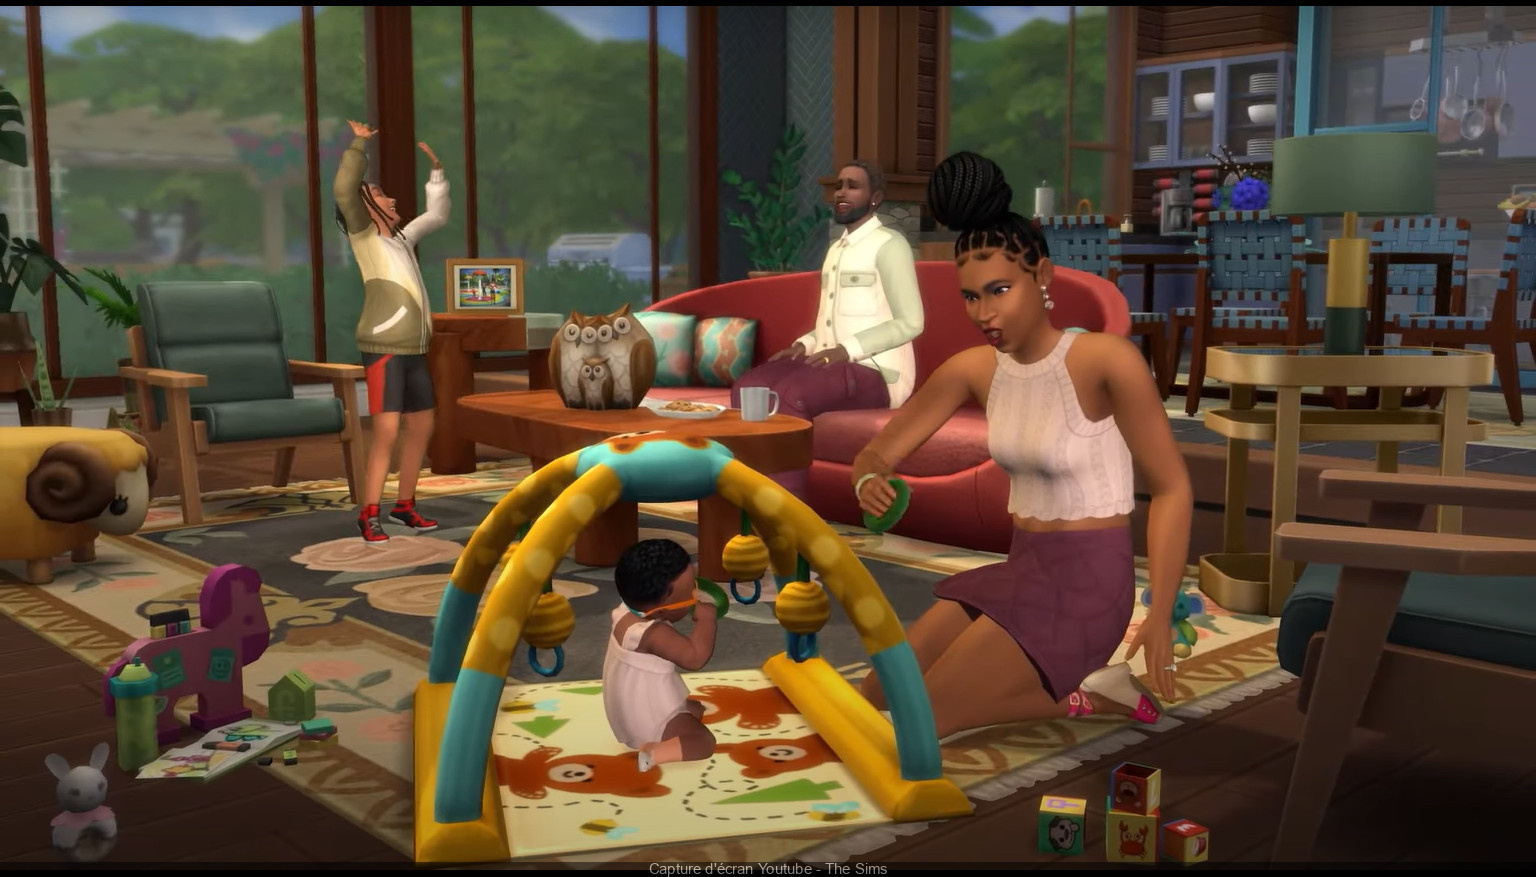 Growing Up Together: The Sims 4 Expansion Pack to Grow Your Family 